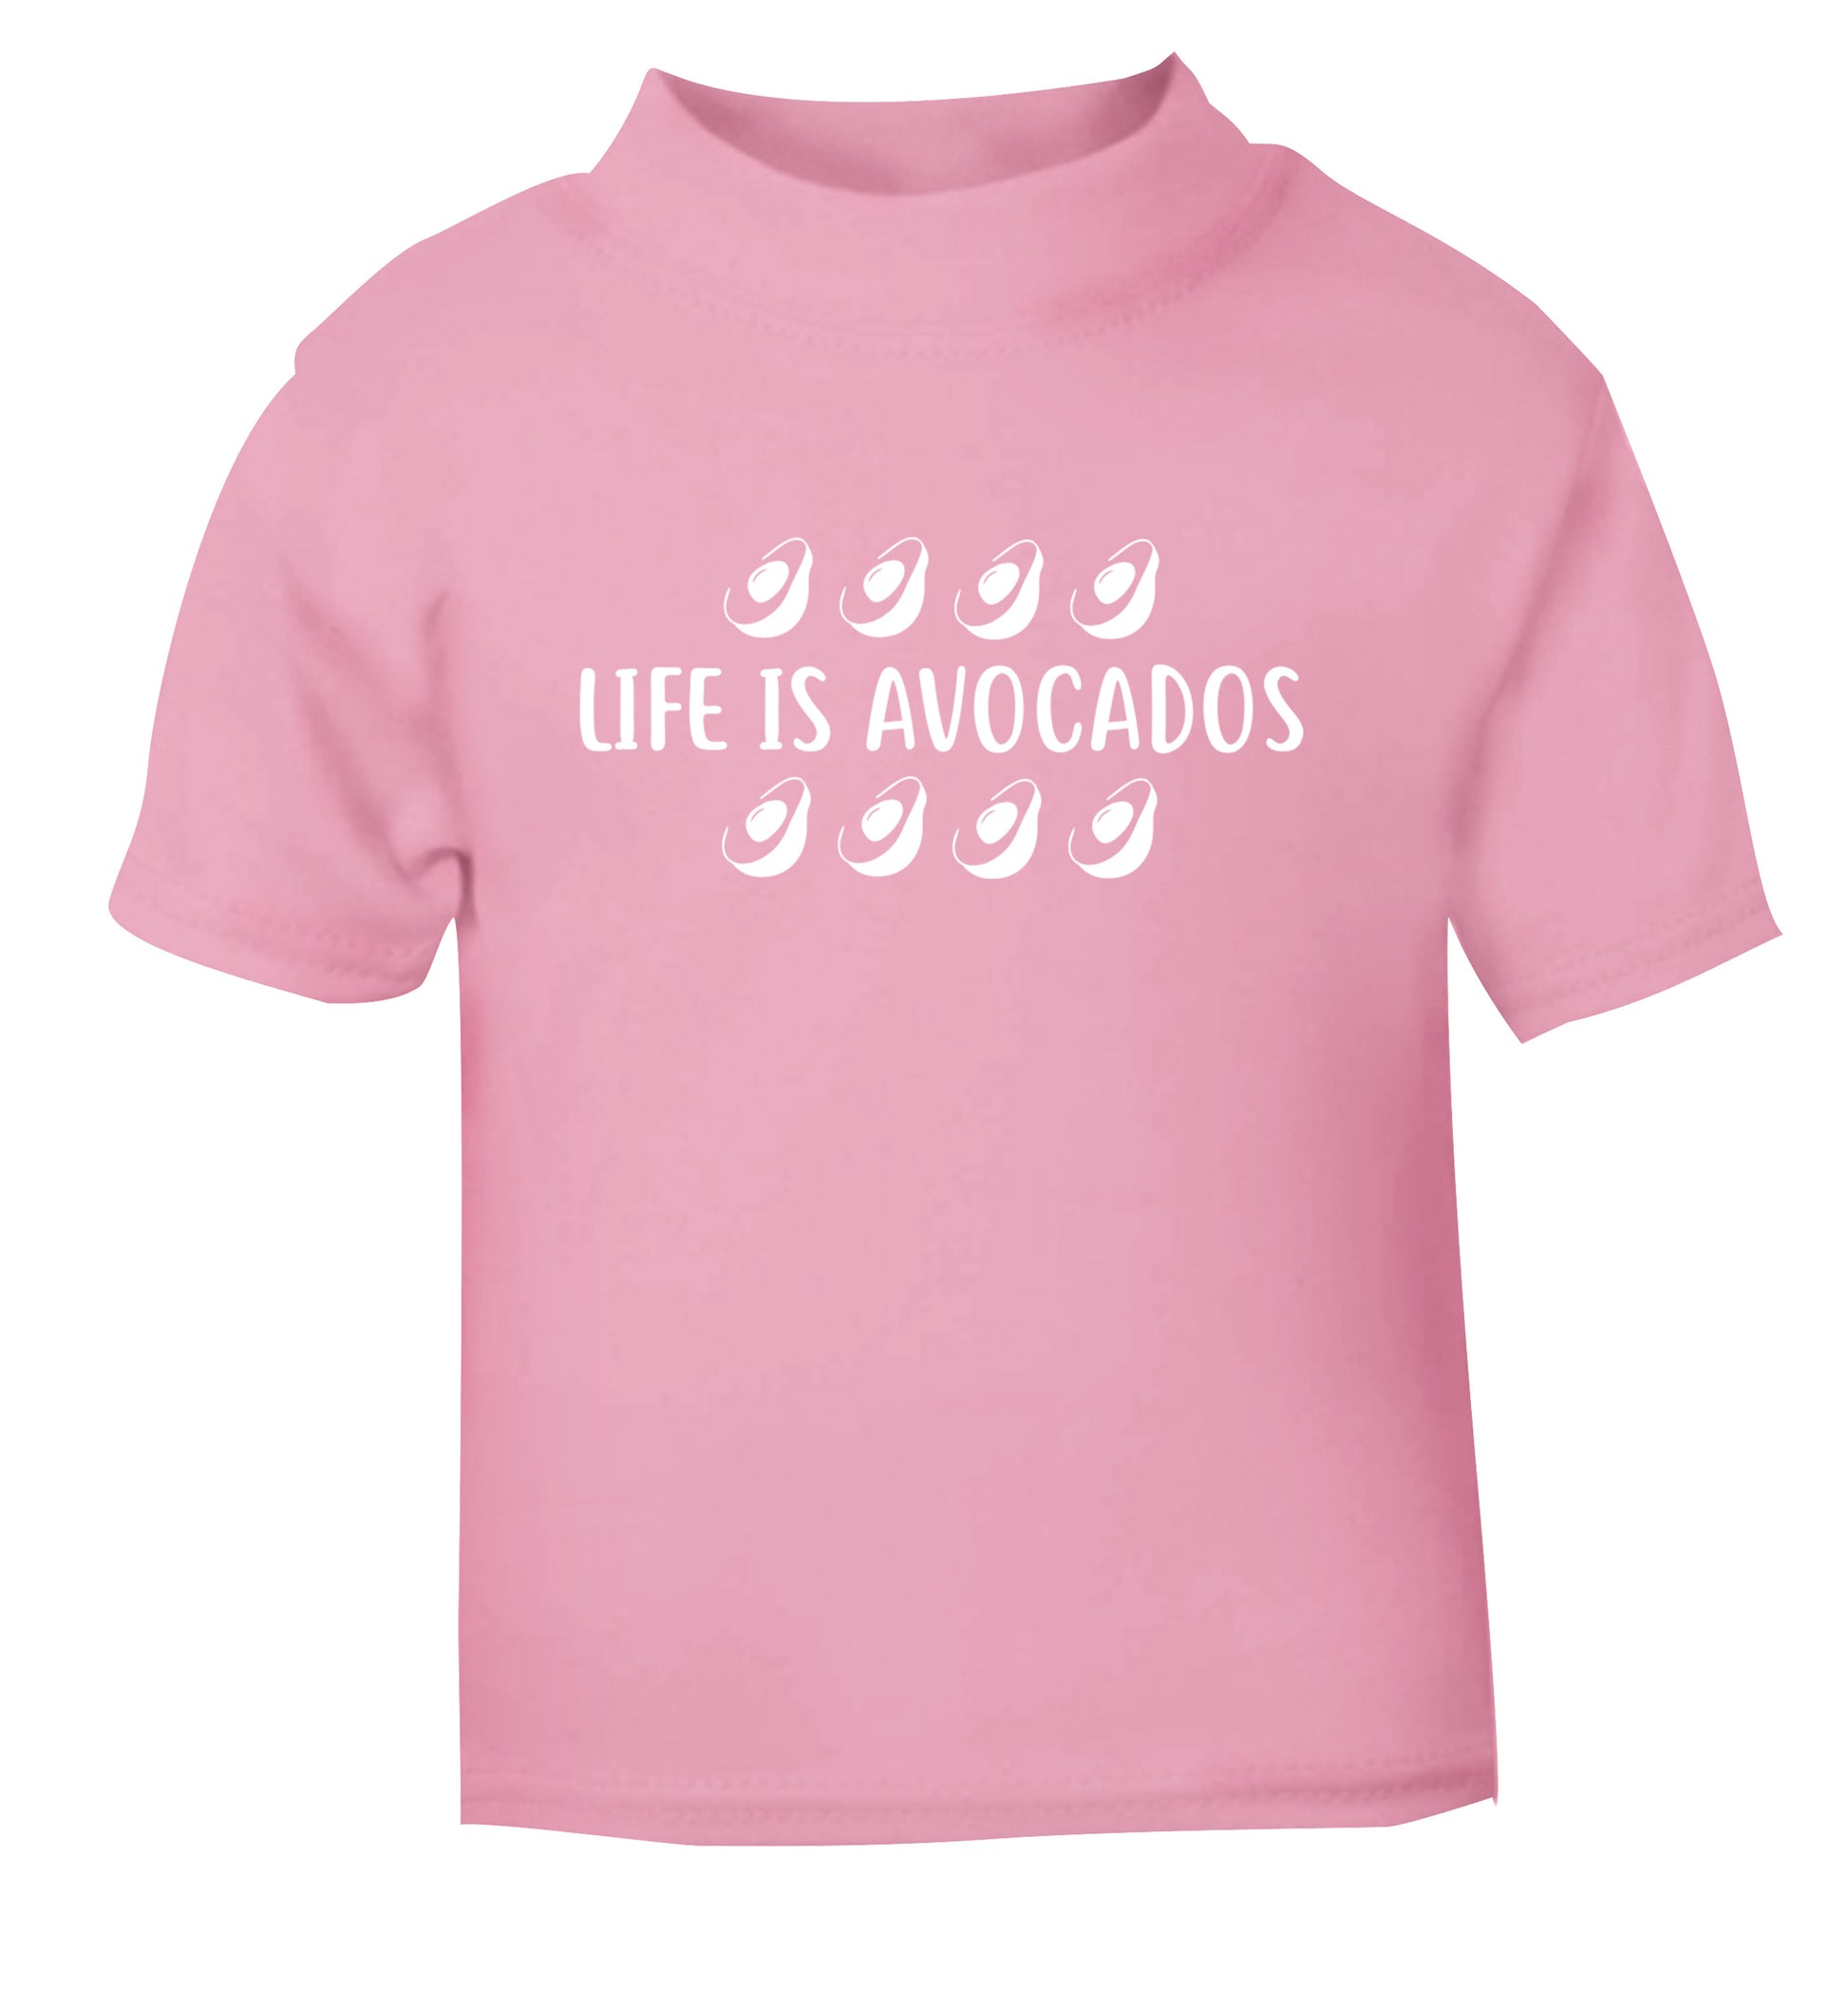 Life is avocados light pink Baby Toddler Tshirt 2 Years